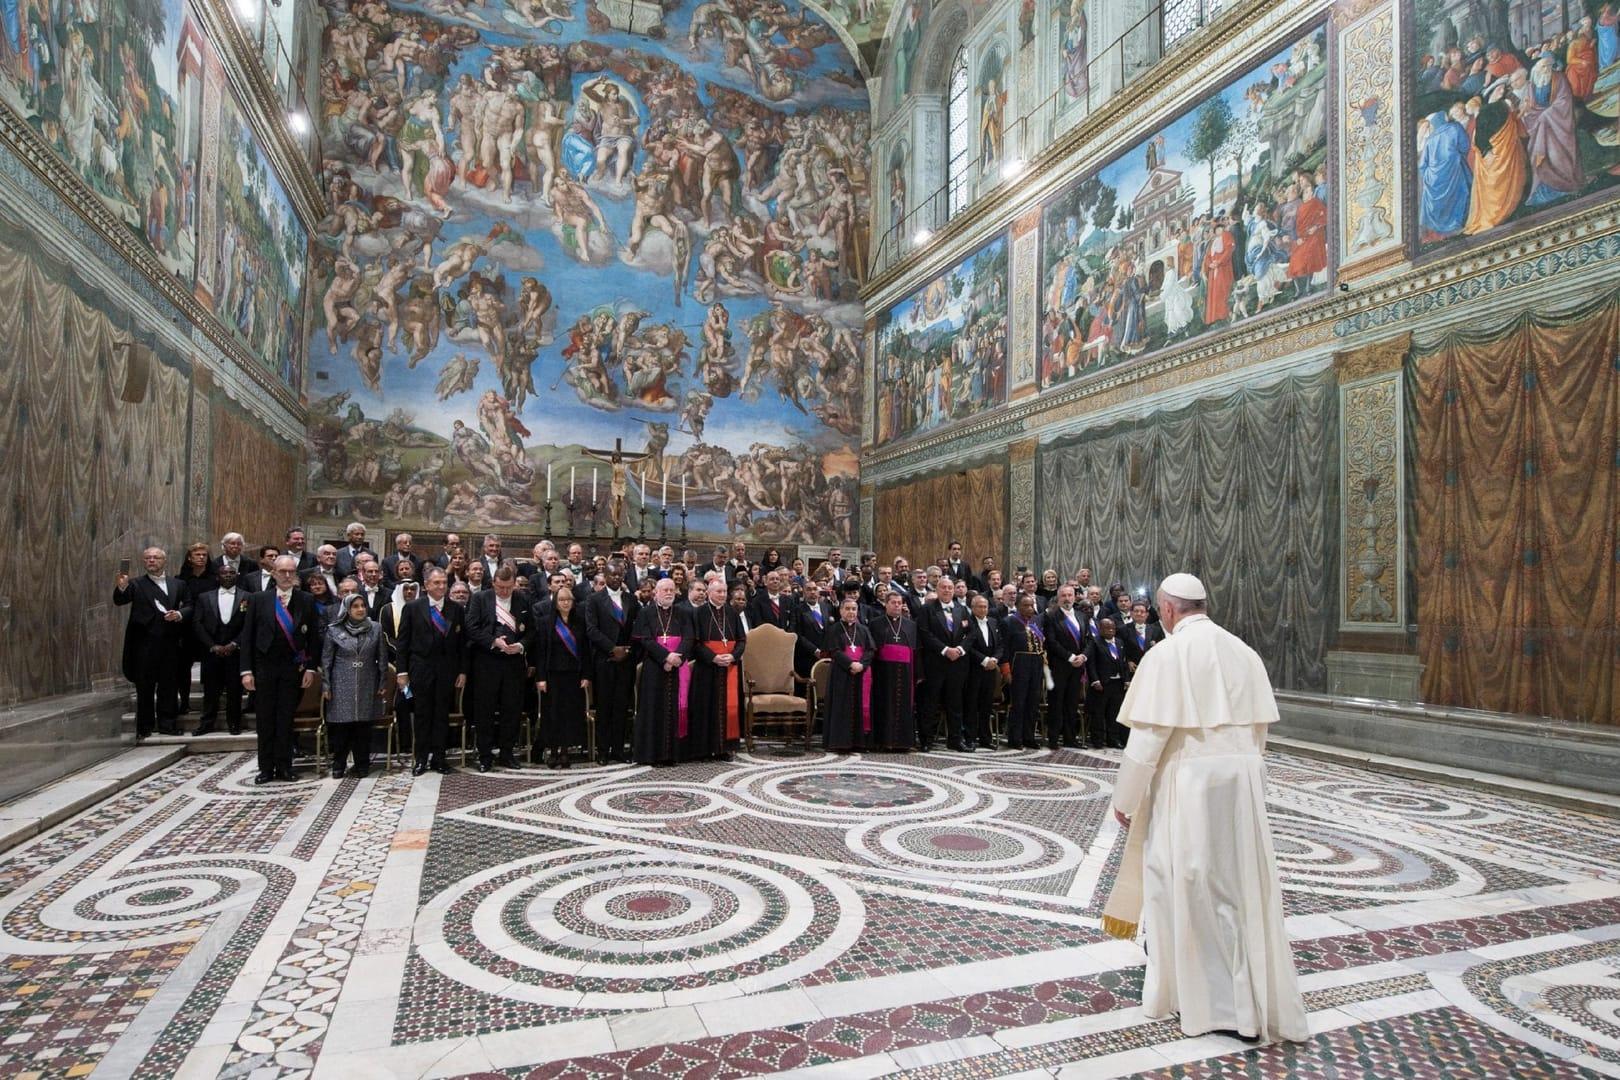 Facing rising nationalist and populist tide, Pope extols multilateral diplomacy